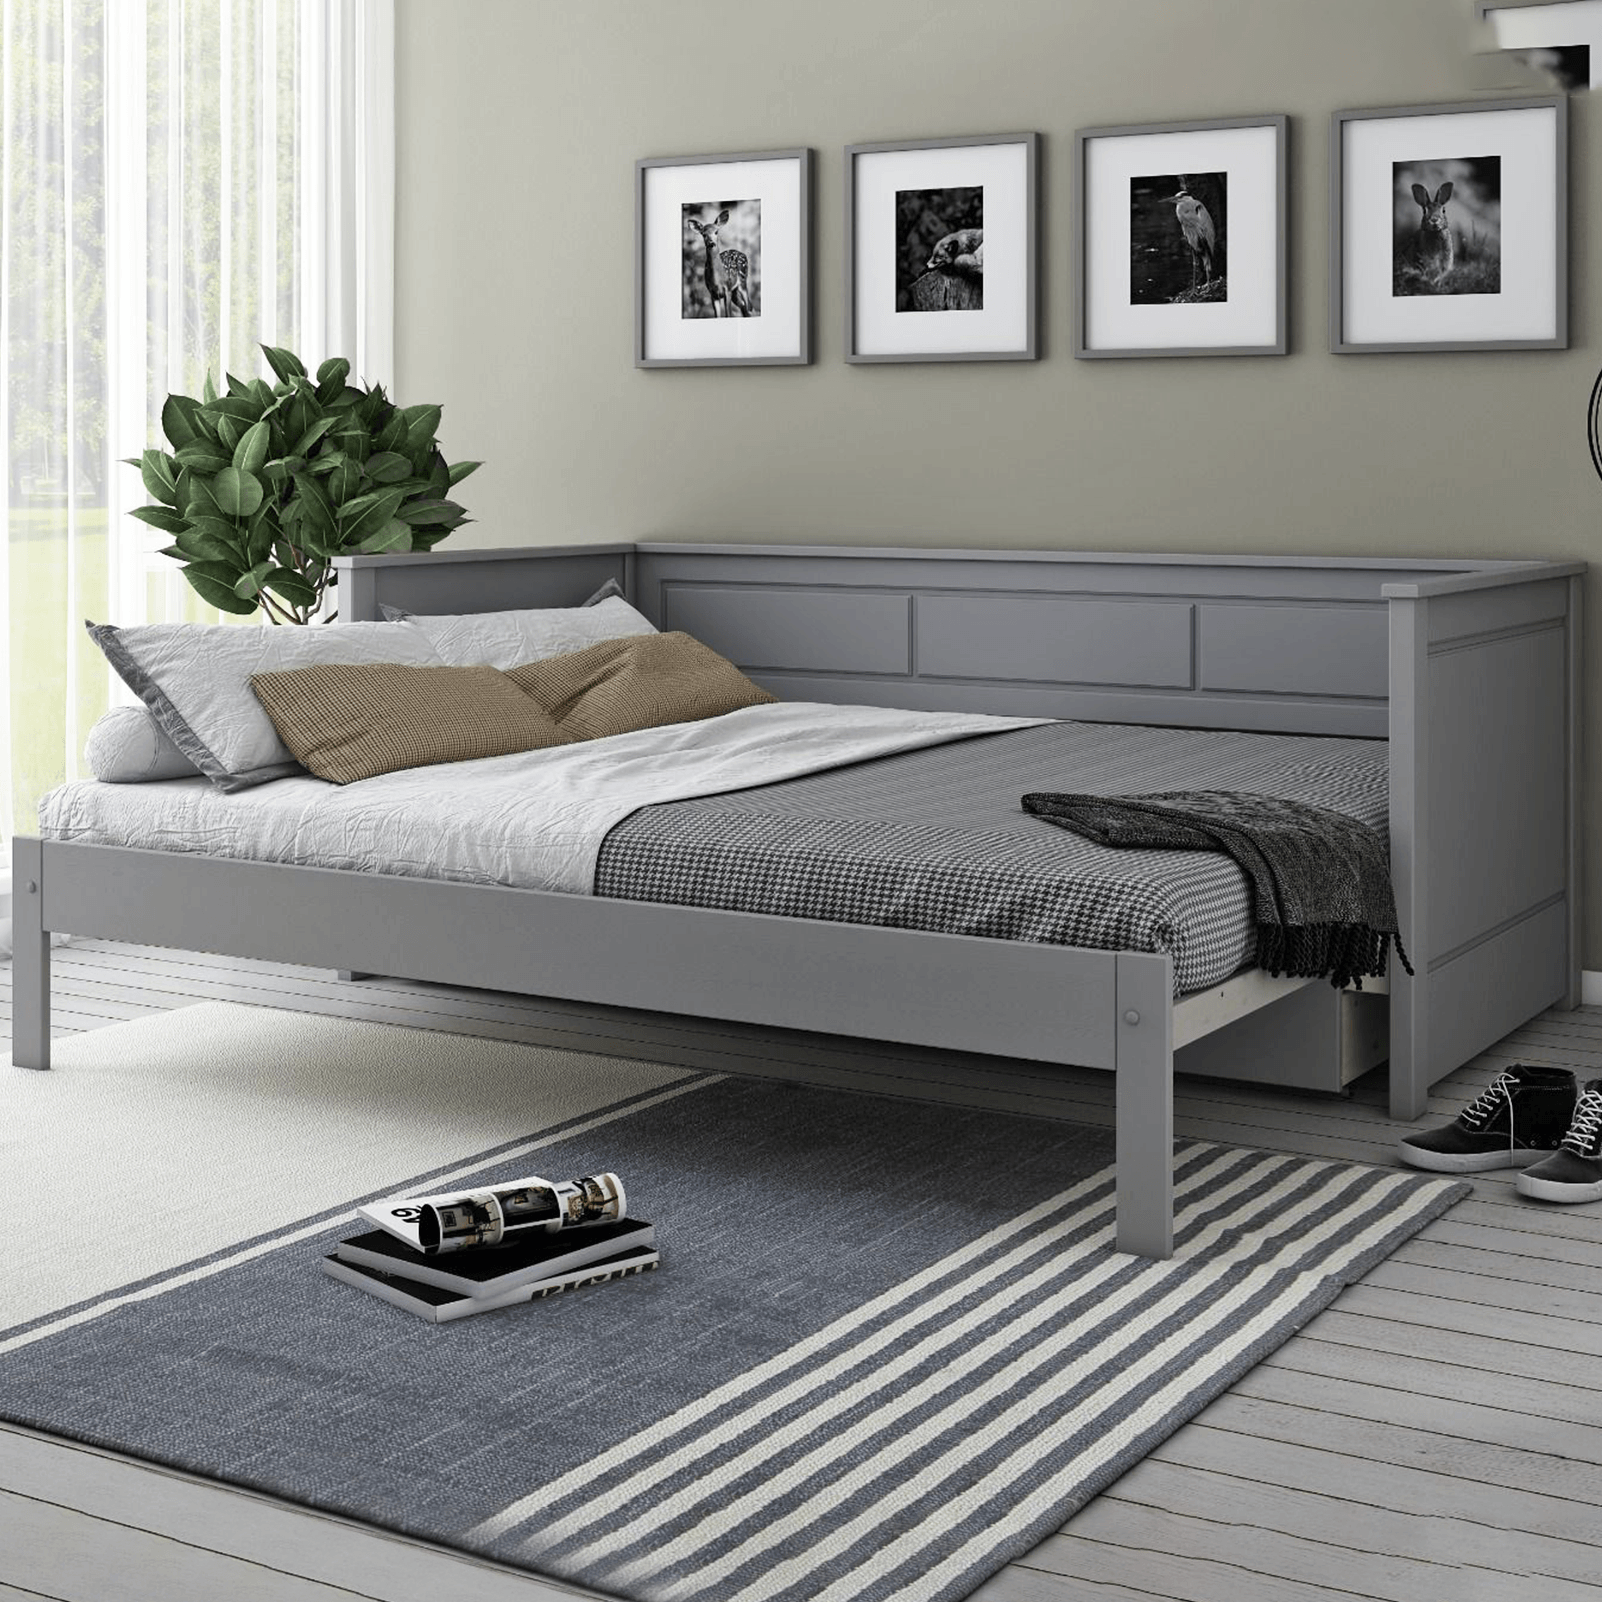 Erika Luxury Guest Bed Grey Solid Wood with Mattress Bundle